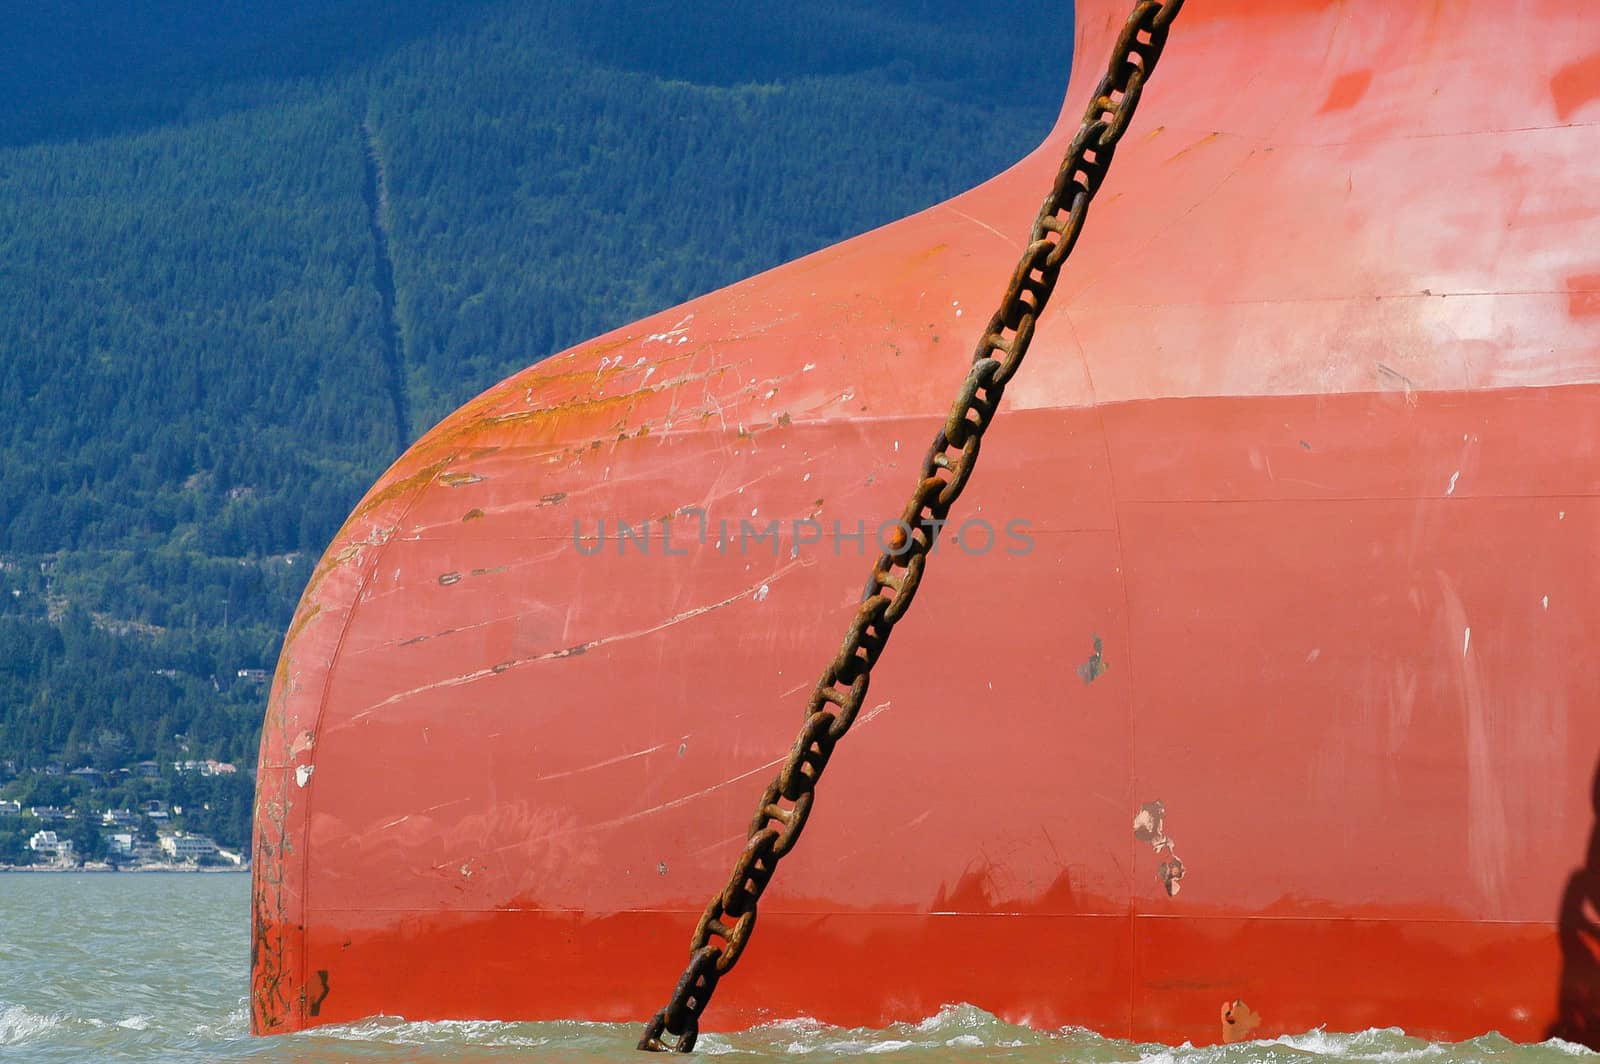 Bow of Tanker at anchor in English Bay, Vancouver, BC